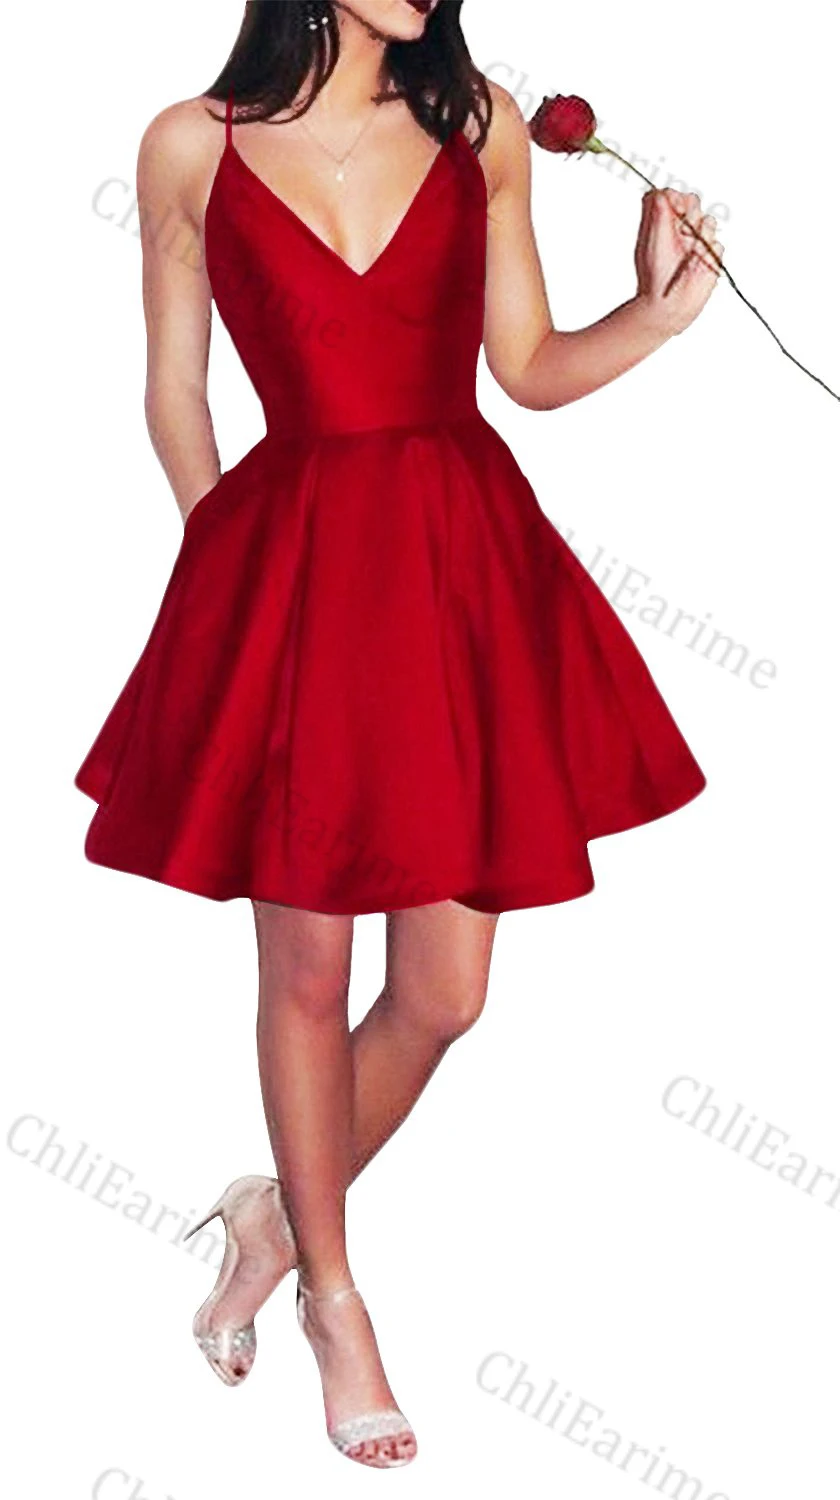 Women's Short Spaghetti Straps V-Neck A-Line Homecoming Dress With Pockets